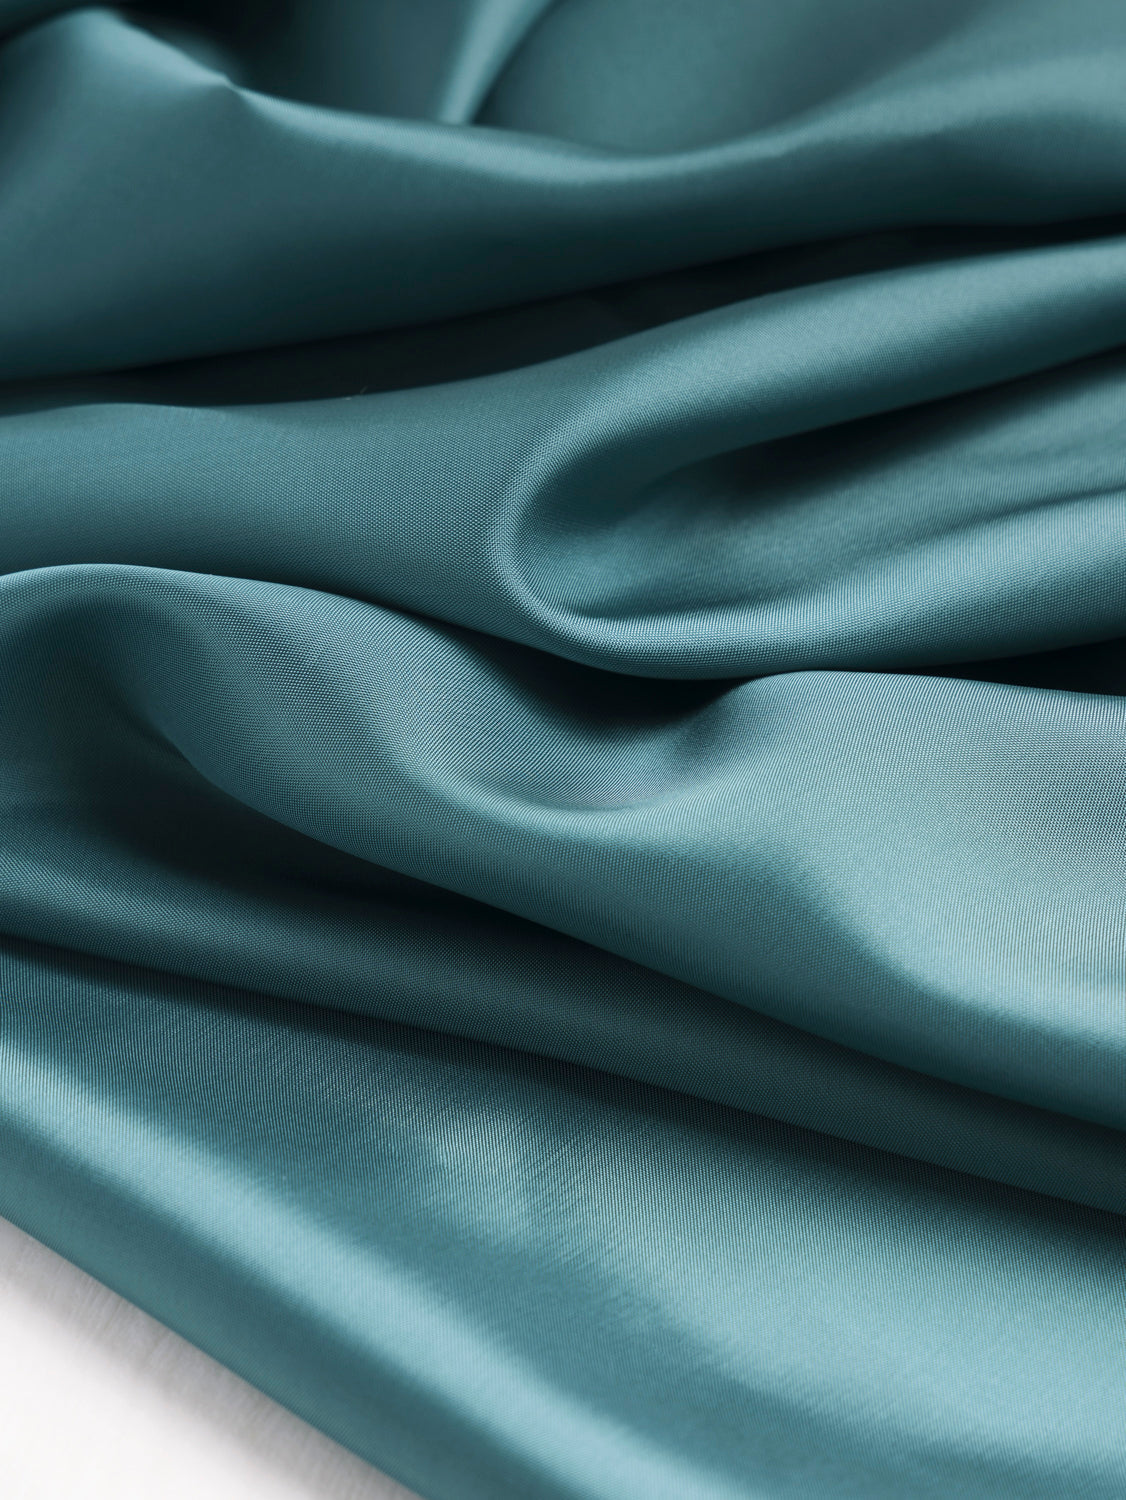 Semi Satin Lining Fabric For Coat Suits at Lowest Price In Sonipat